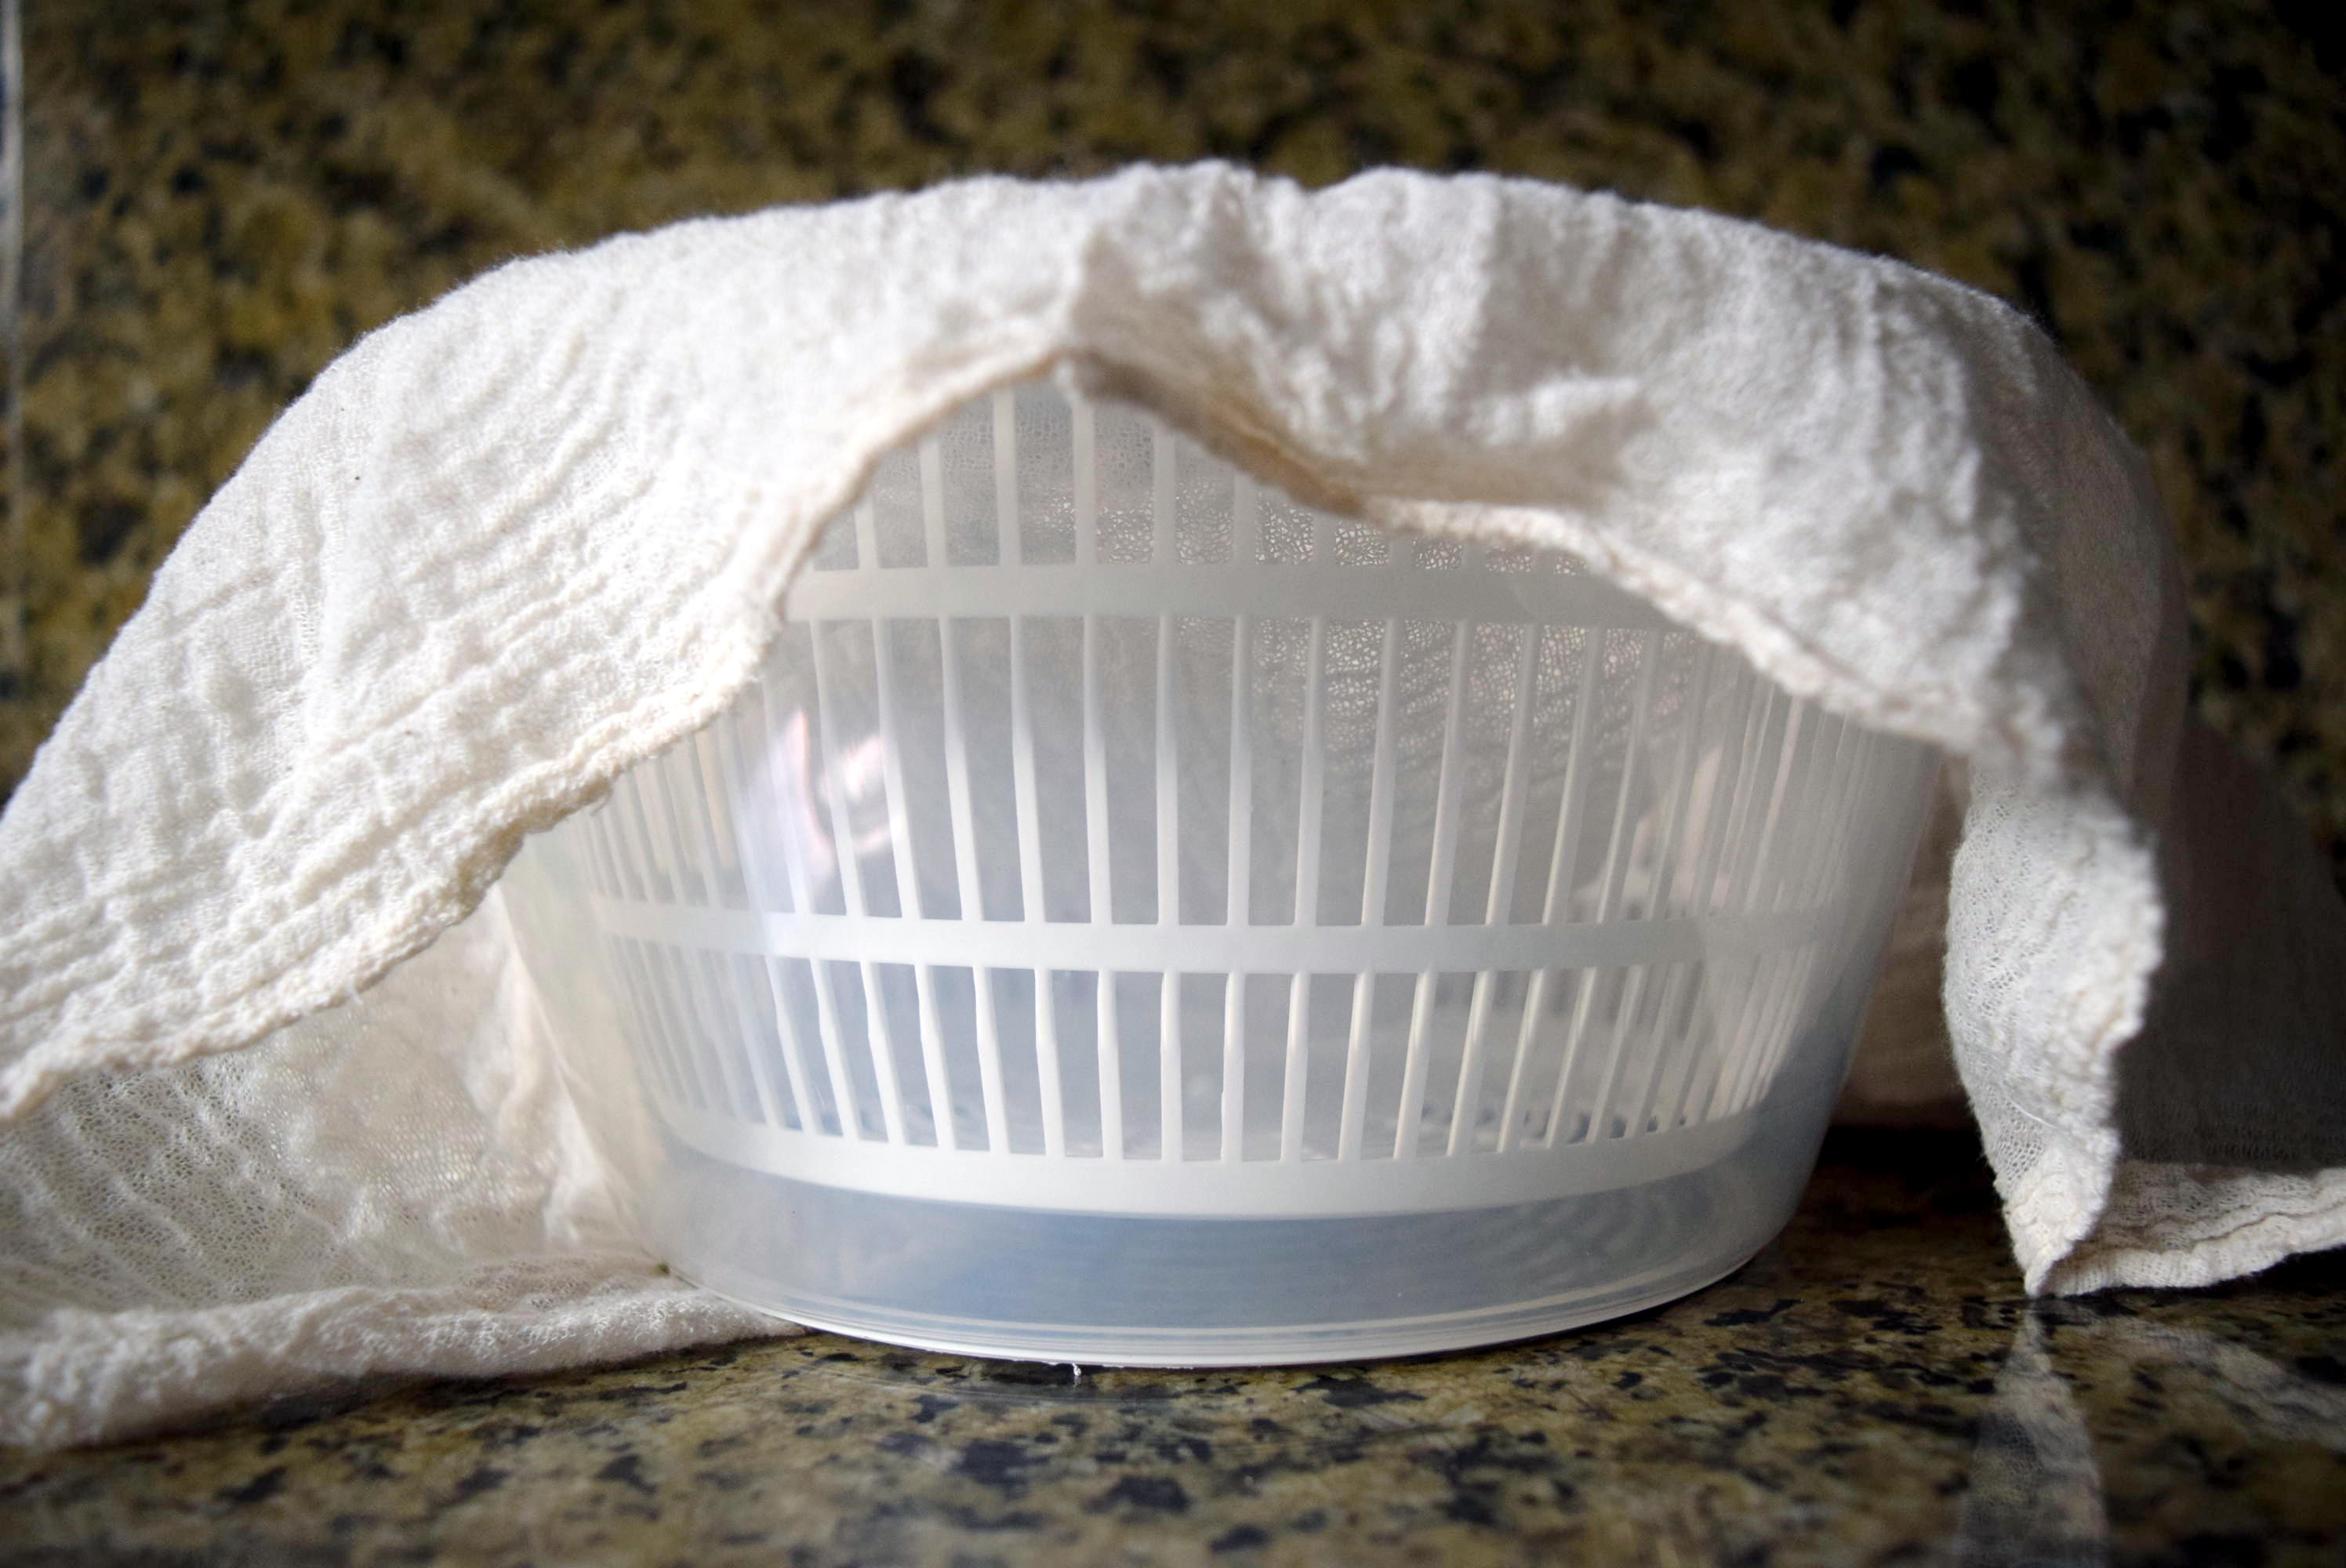 Cheesecloth and IKEA Tokig salad spinner for Homemade Instant Pot Ricotta Cheese from side